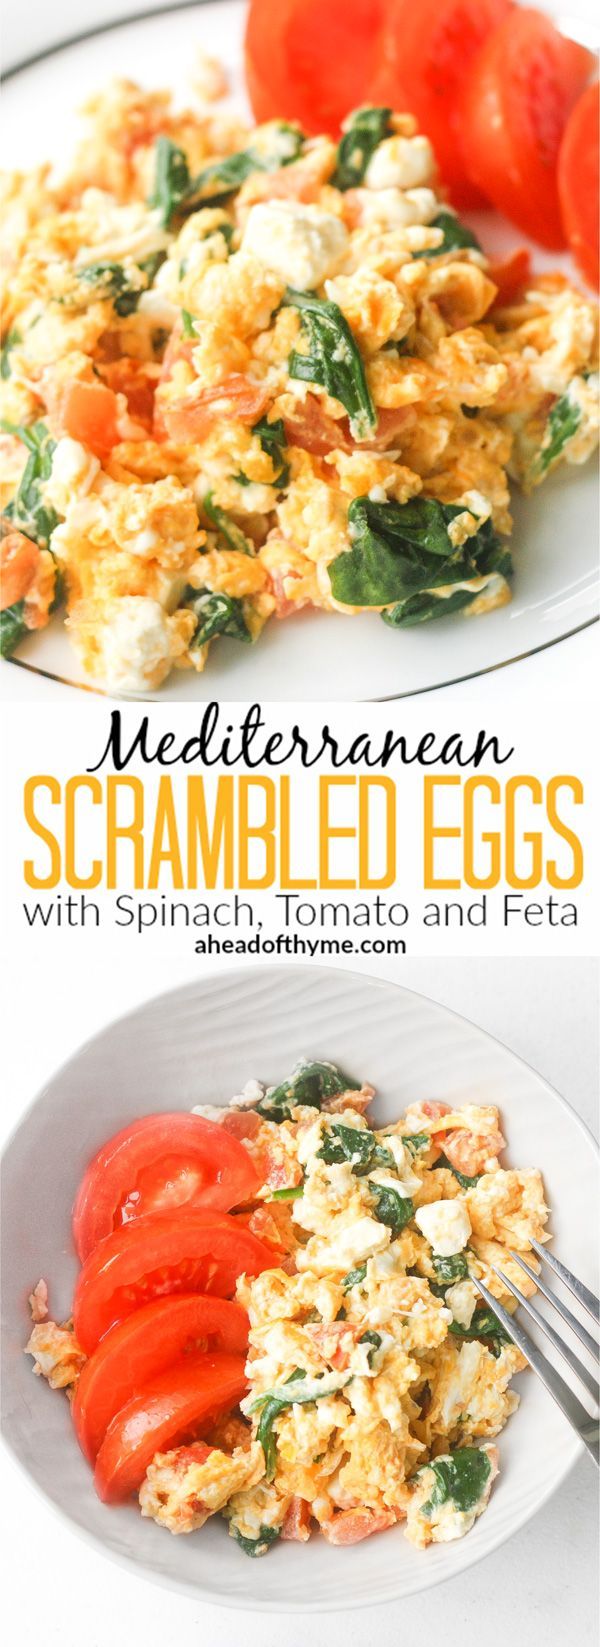 Mediterranean Scrambled Eggs with Spinach, Tomato and Feta: Got a few minutes? Spiff up your breakfast and make it interesting